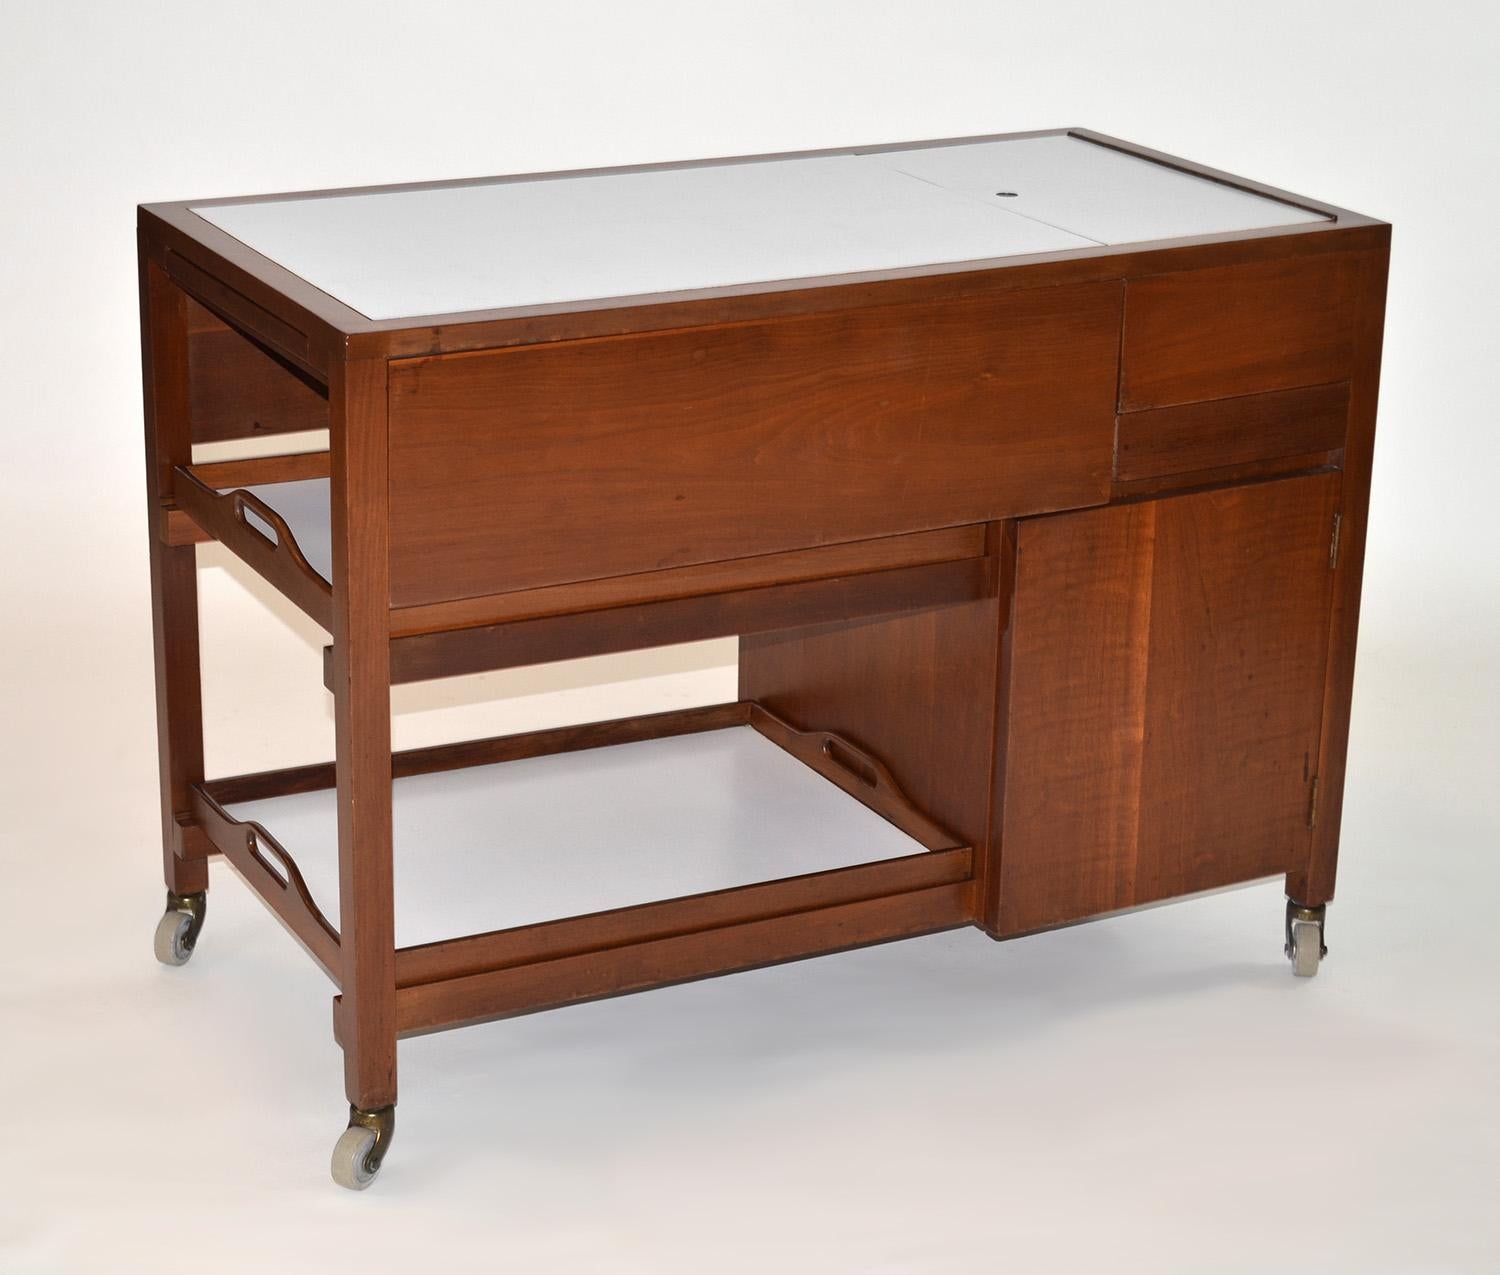 Modern Rolling Serving or Bar Cart by William Pahlmann USA Mid-Century 
Server buffet or bar cart by William Pahlmann Hastings Square Mid-Century Modern
Designed by interior designer William Pahlmann (1900-1987) in the early 1950s for Grand Rapids